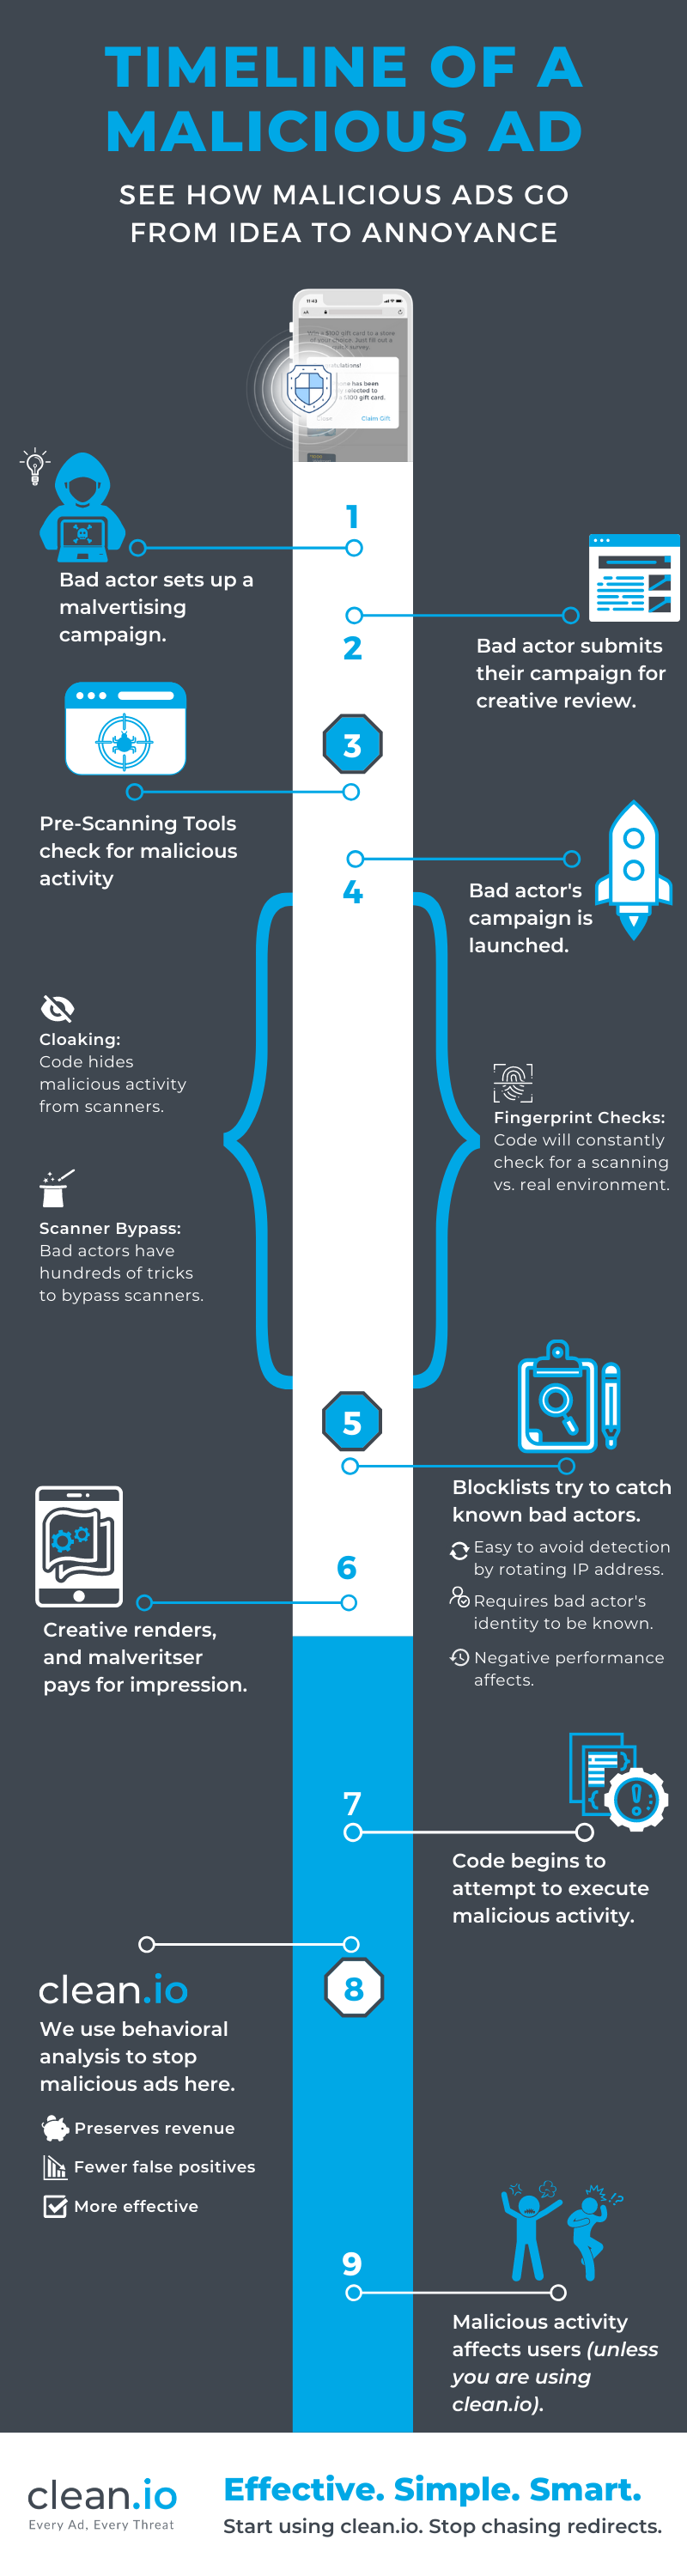 Clean.io-Publisher-Infographic-timeline malicious ad